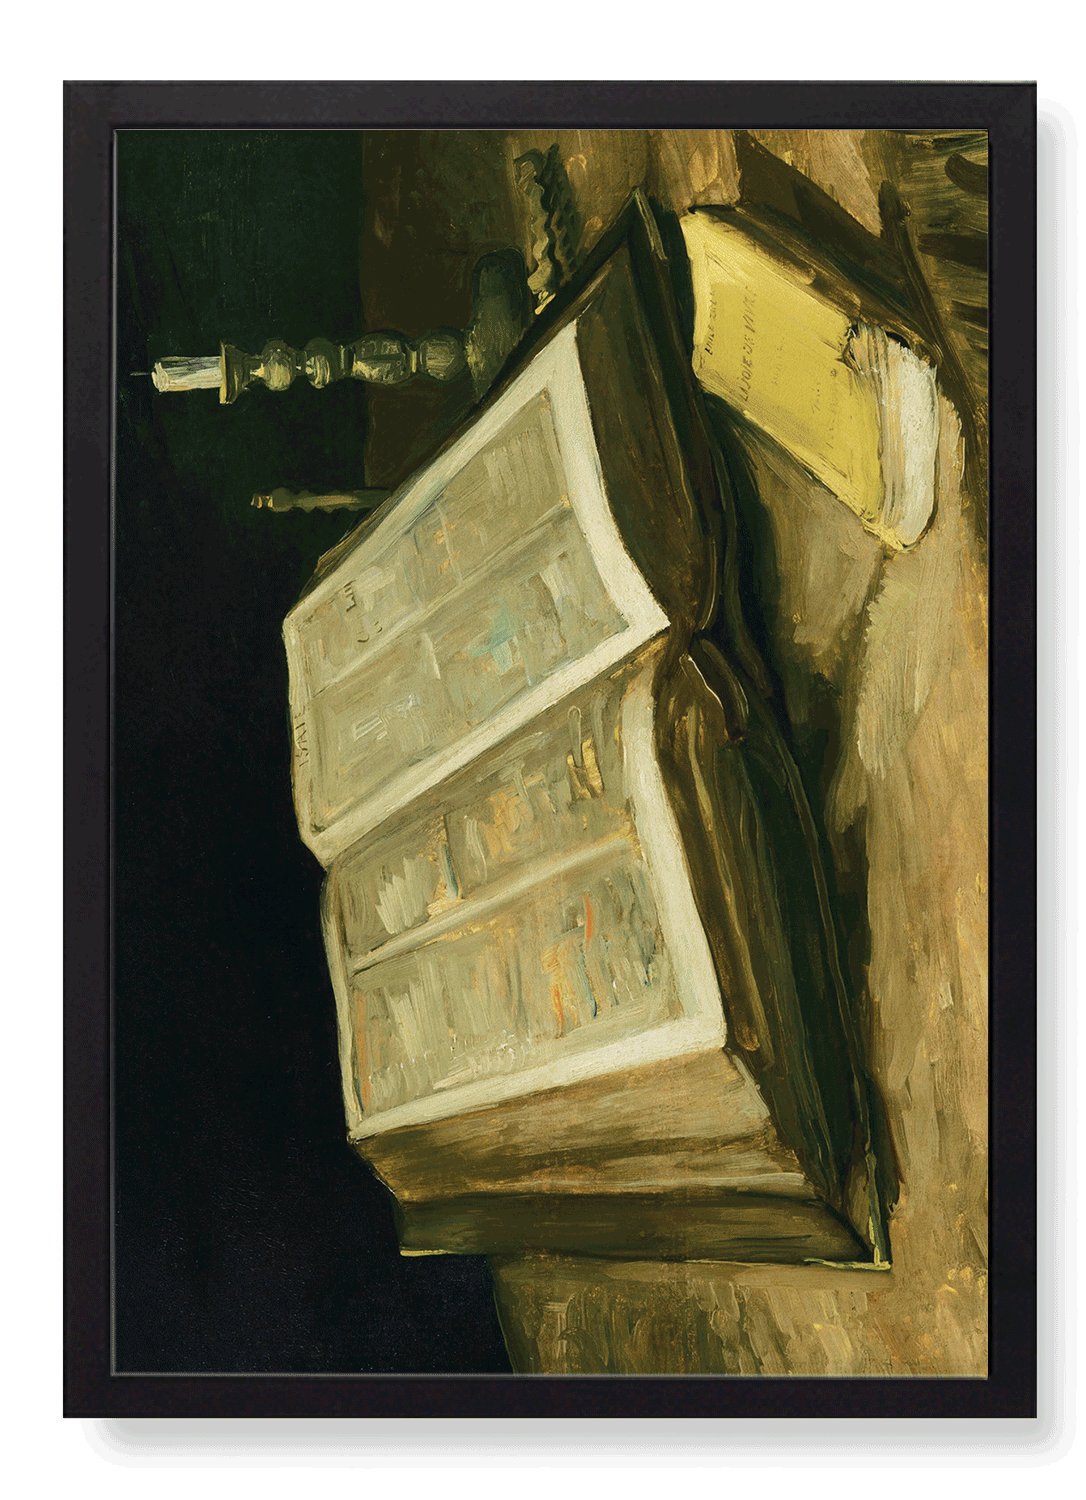 STILL LIFE WITH BIBLE (1885)